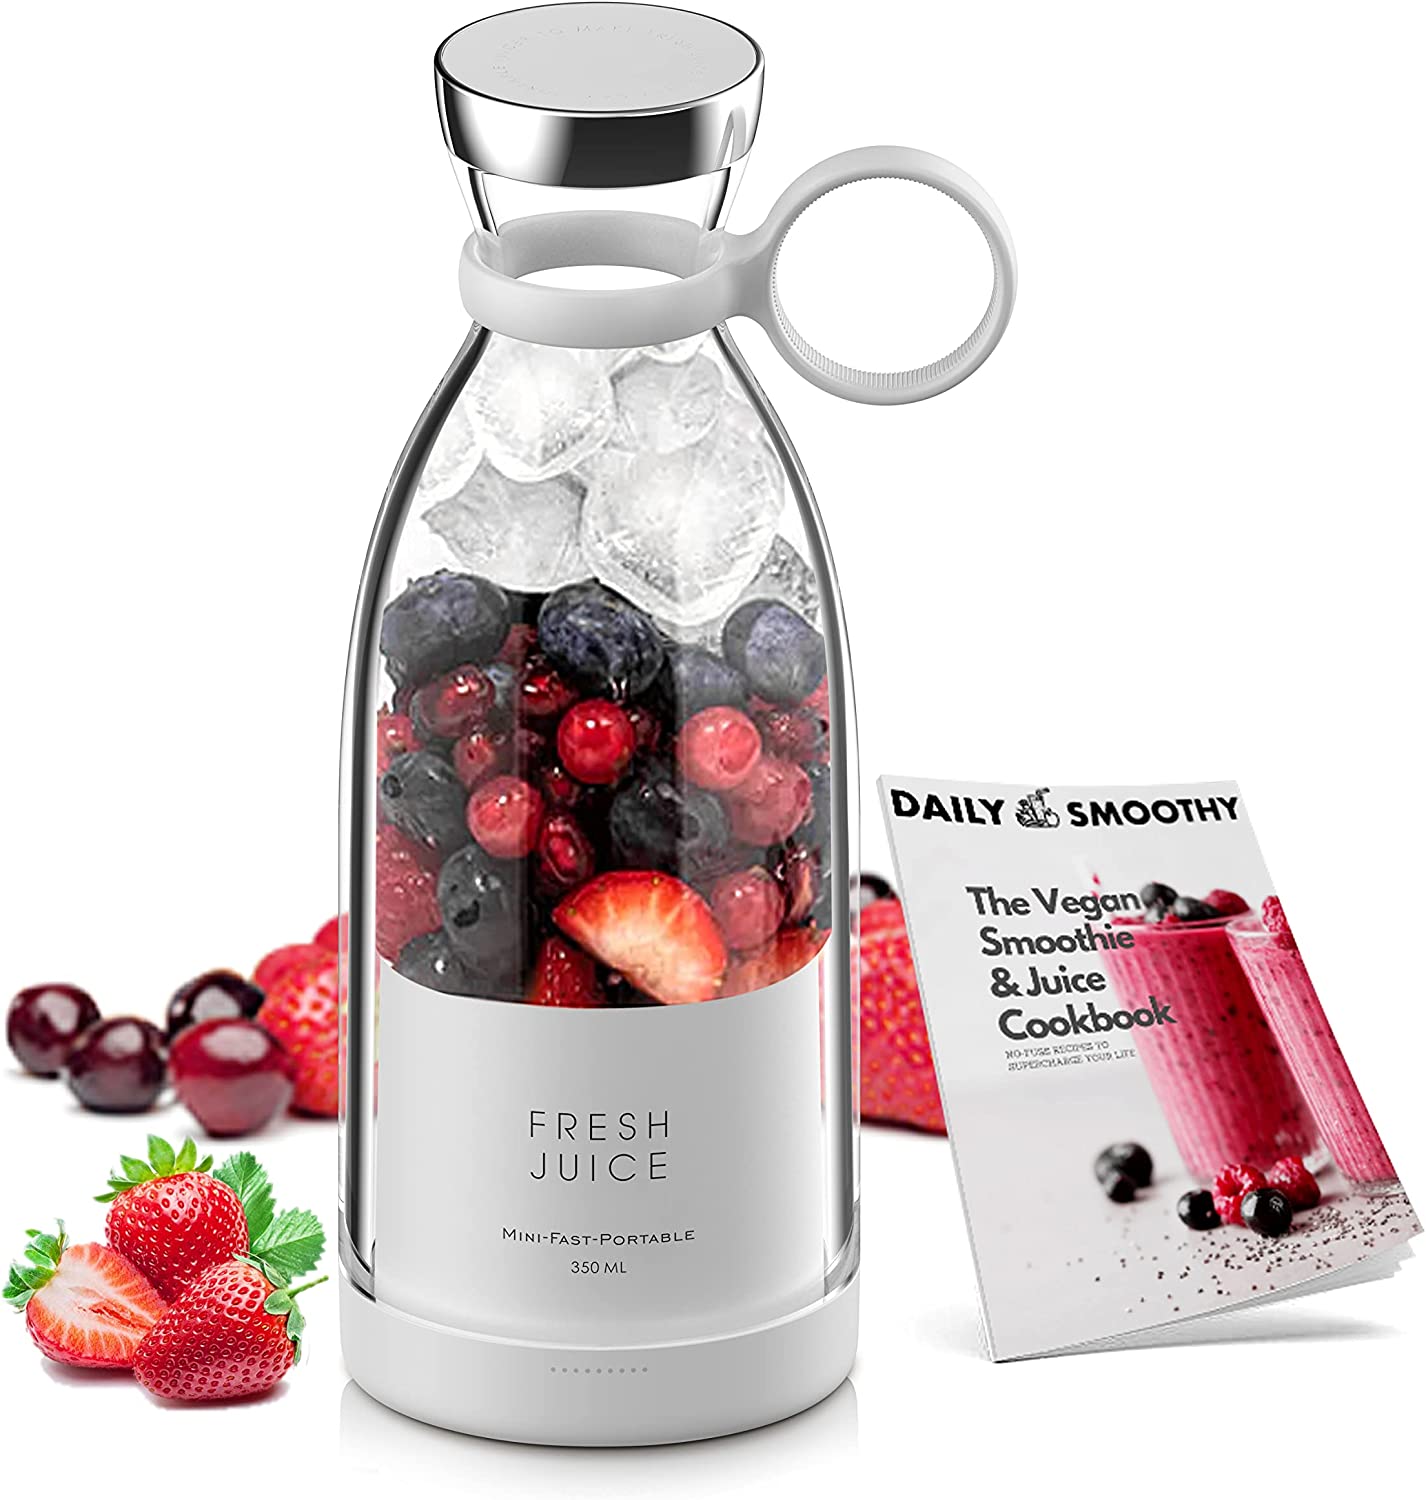 350ml Portable Instant Smoothie Juicer Blender with something in it